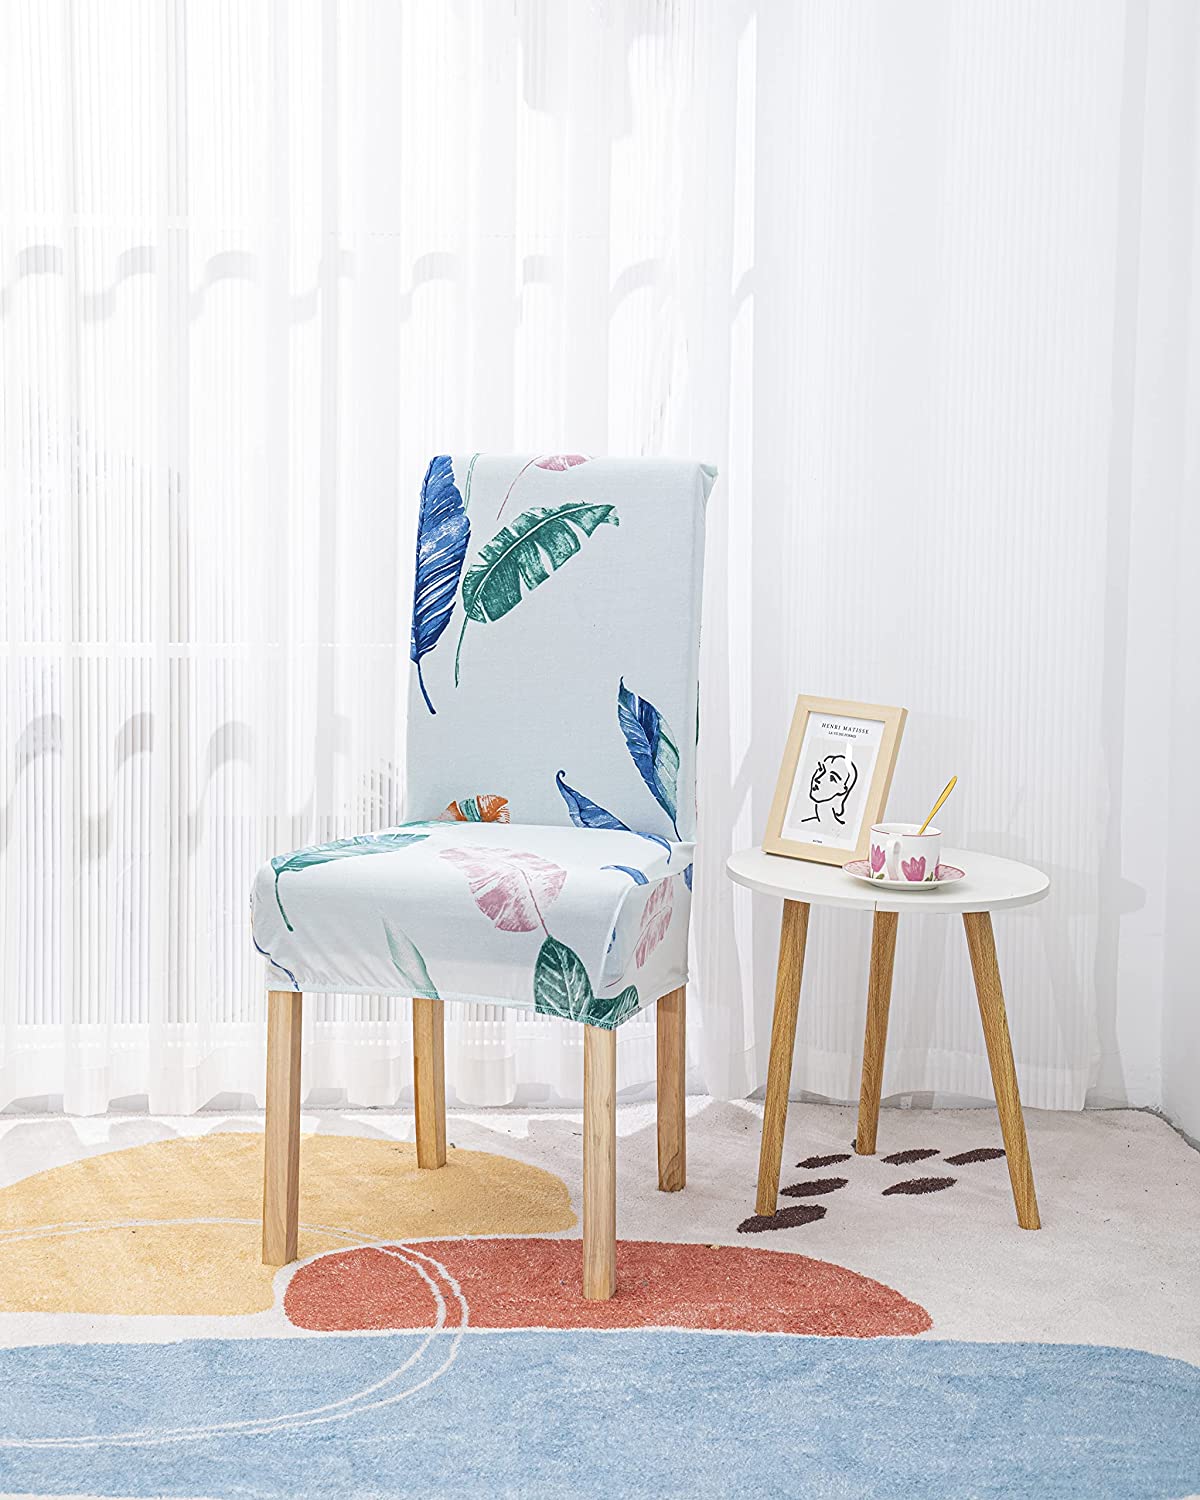 Printed Chair Cover - Light Blue Tropical